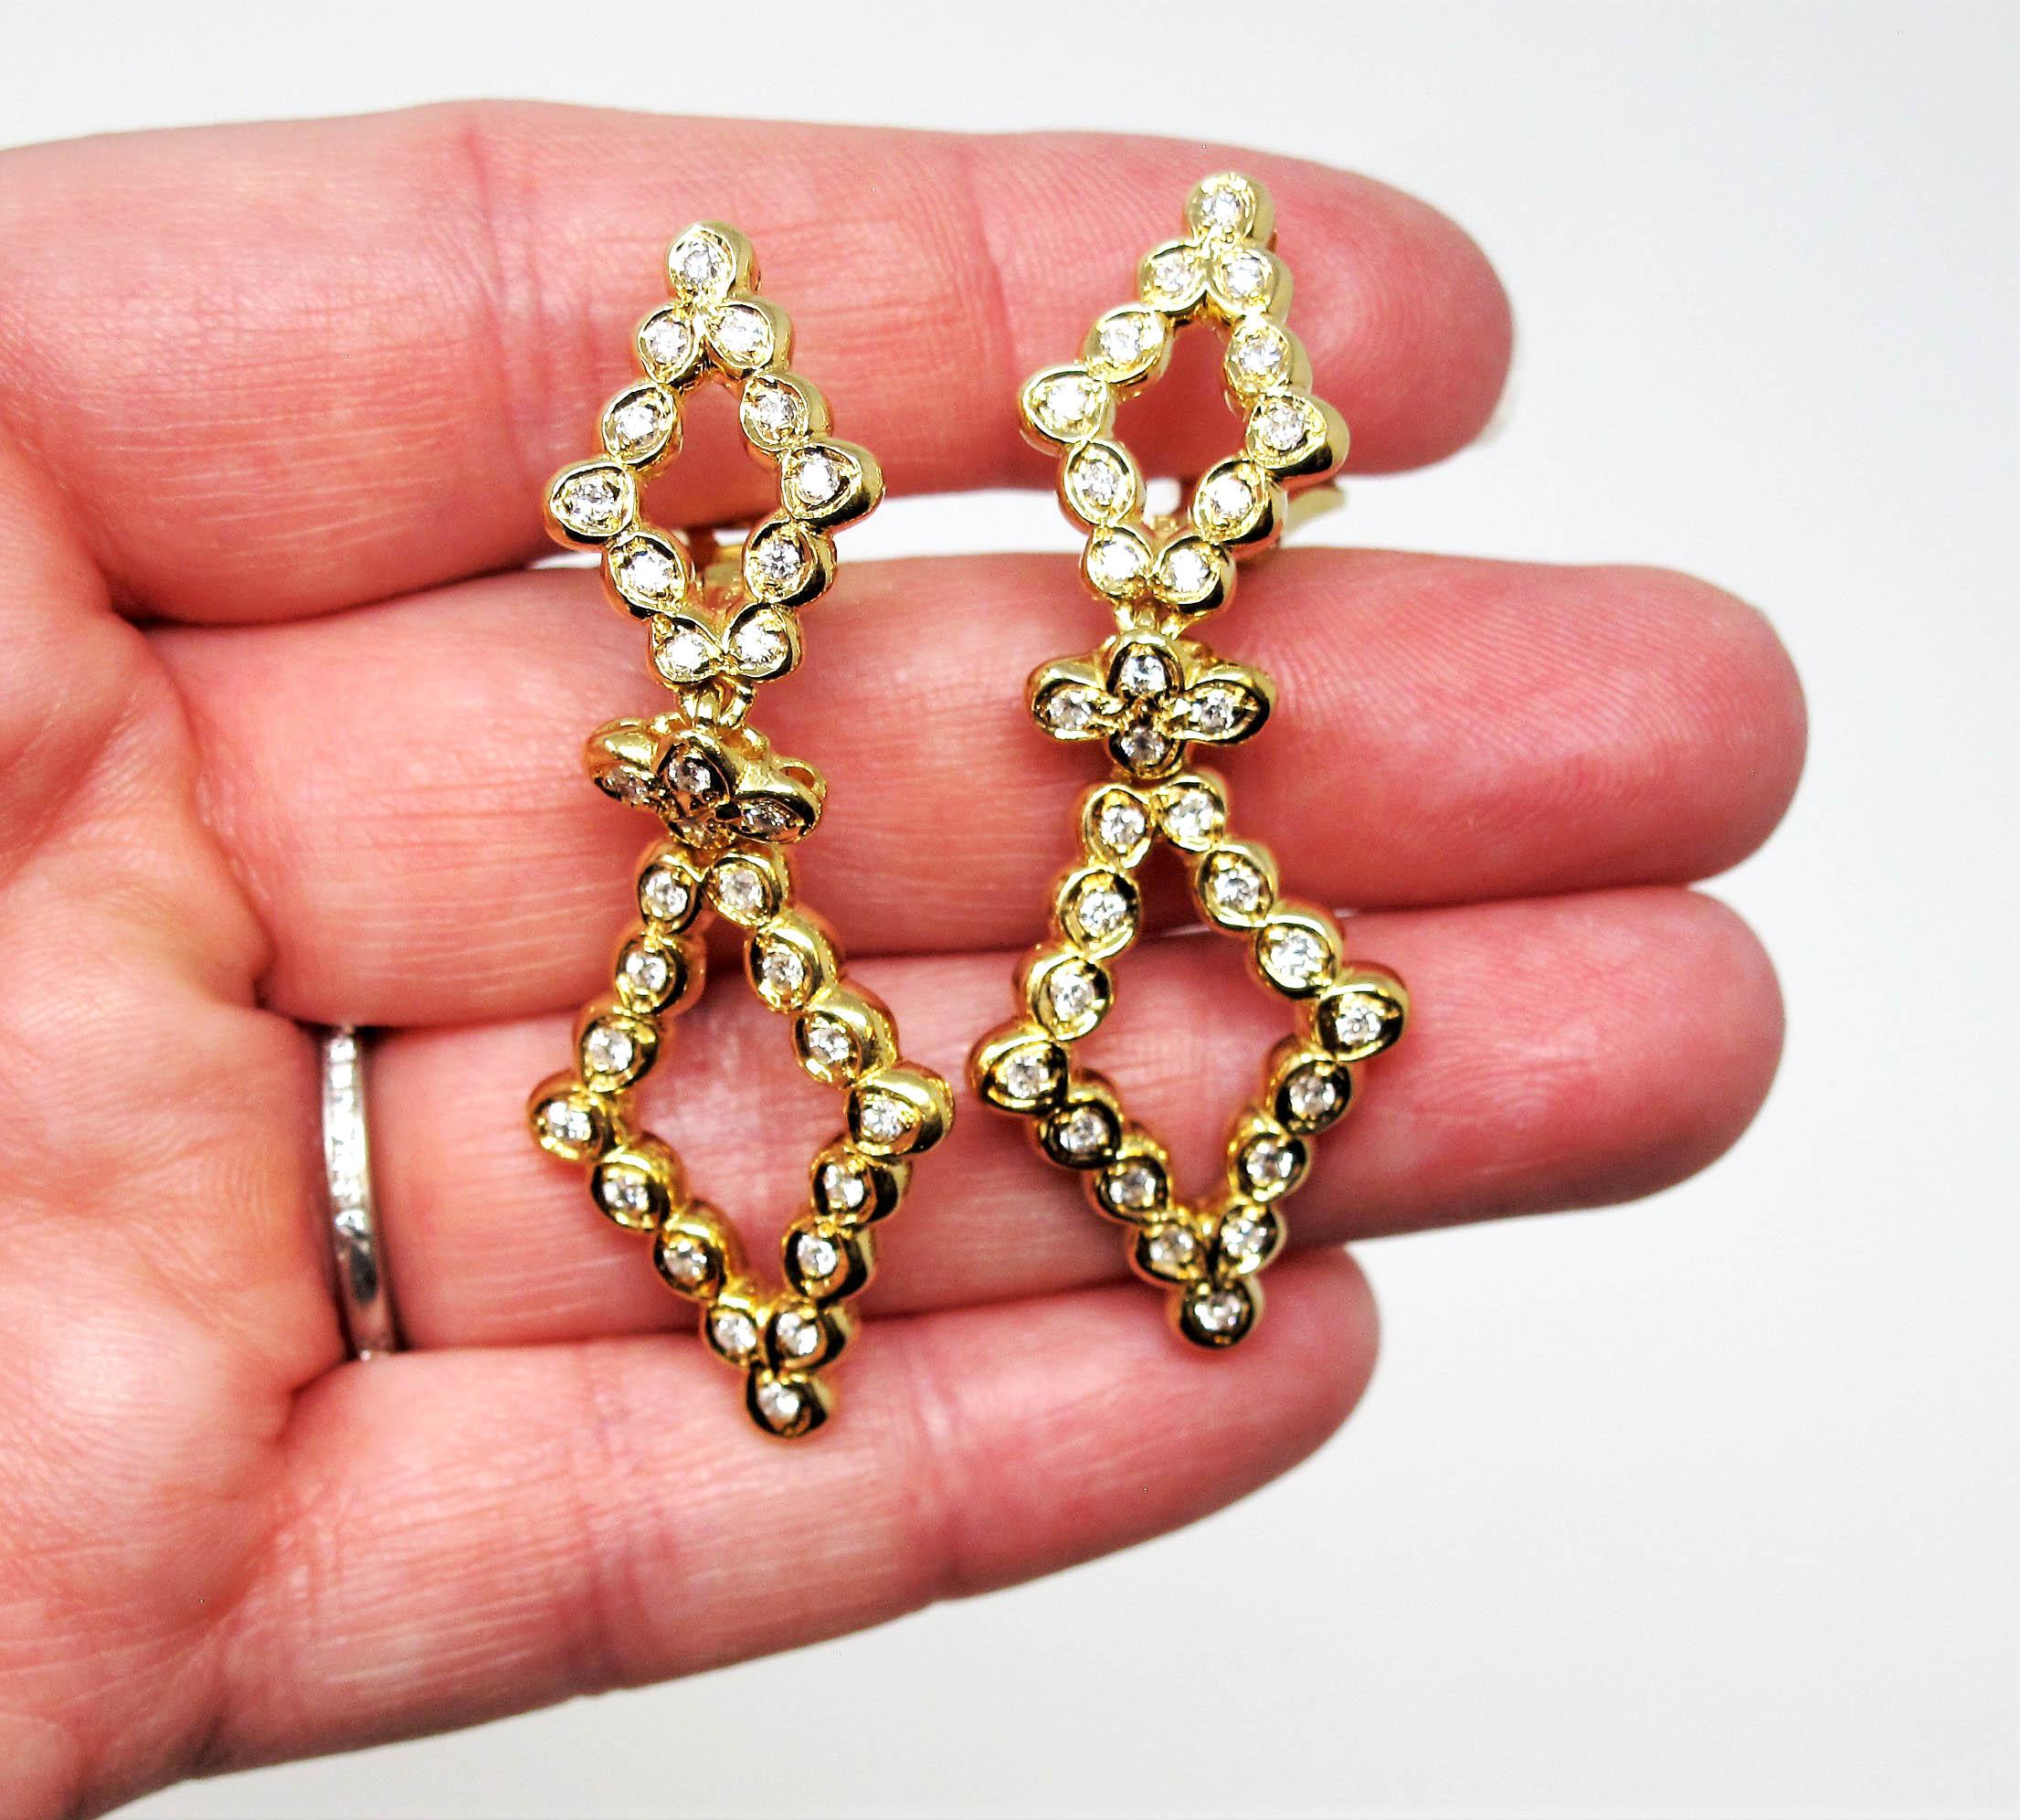 Brilliant diamond drop earrings set in 18 karat yellow gold. Featuring a double open diamond shaped arrangement, these super sparkly stunners dangle gently and glimmer from all angles. The elongated shape offers a flattering feminine fit, while the